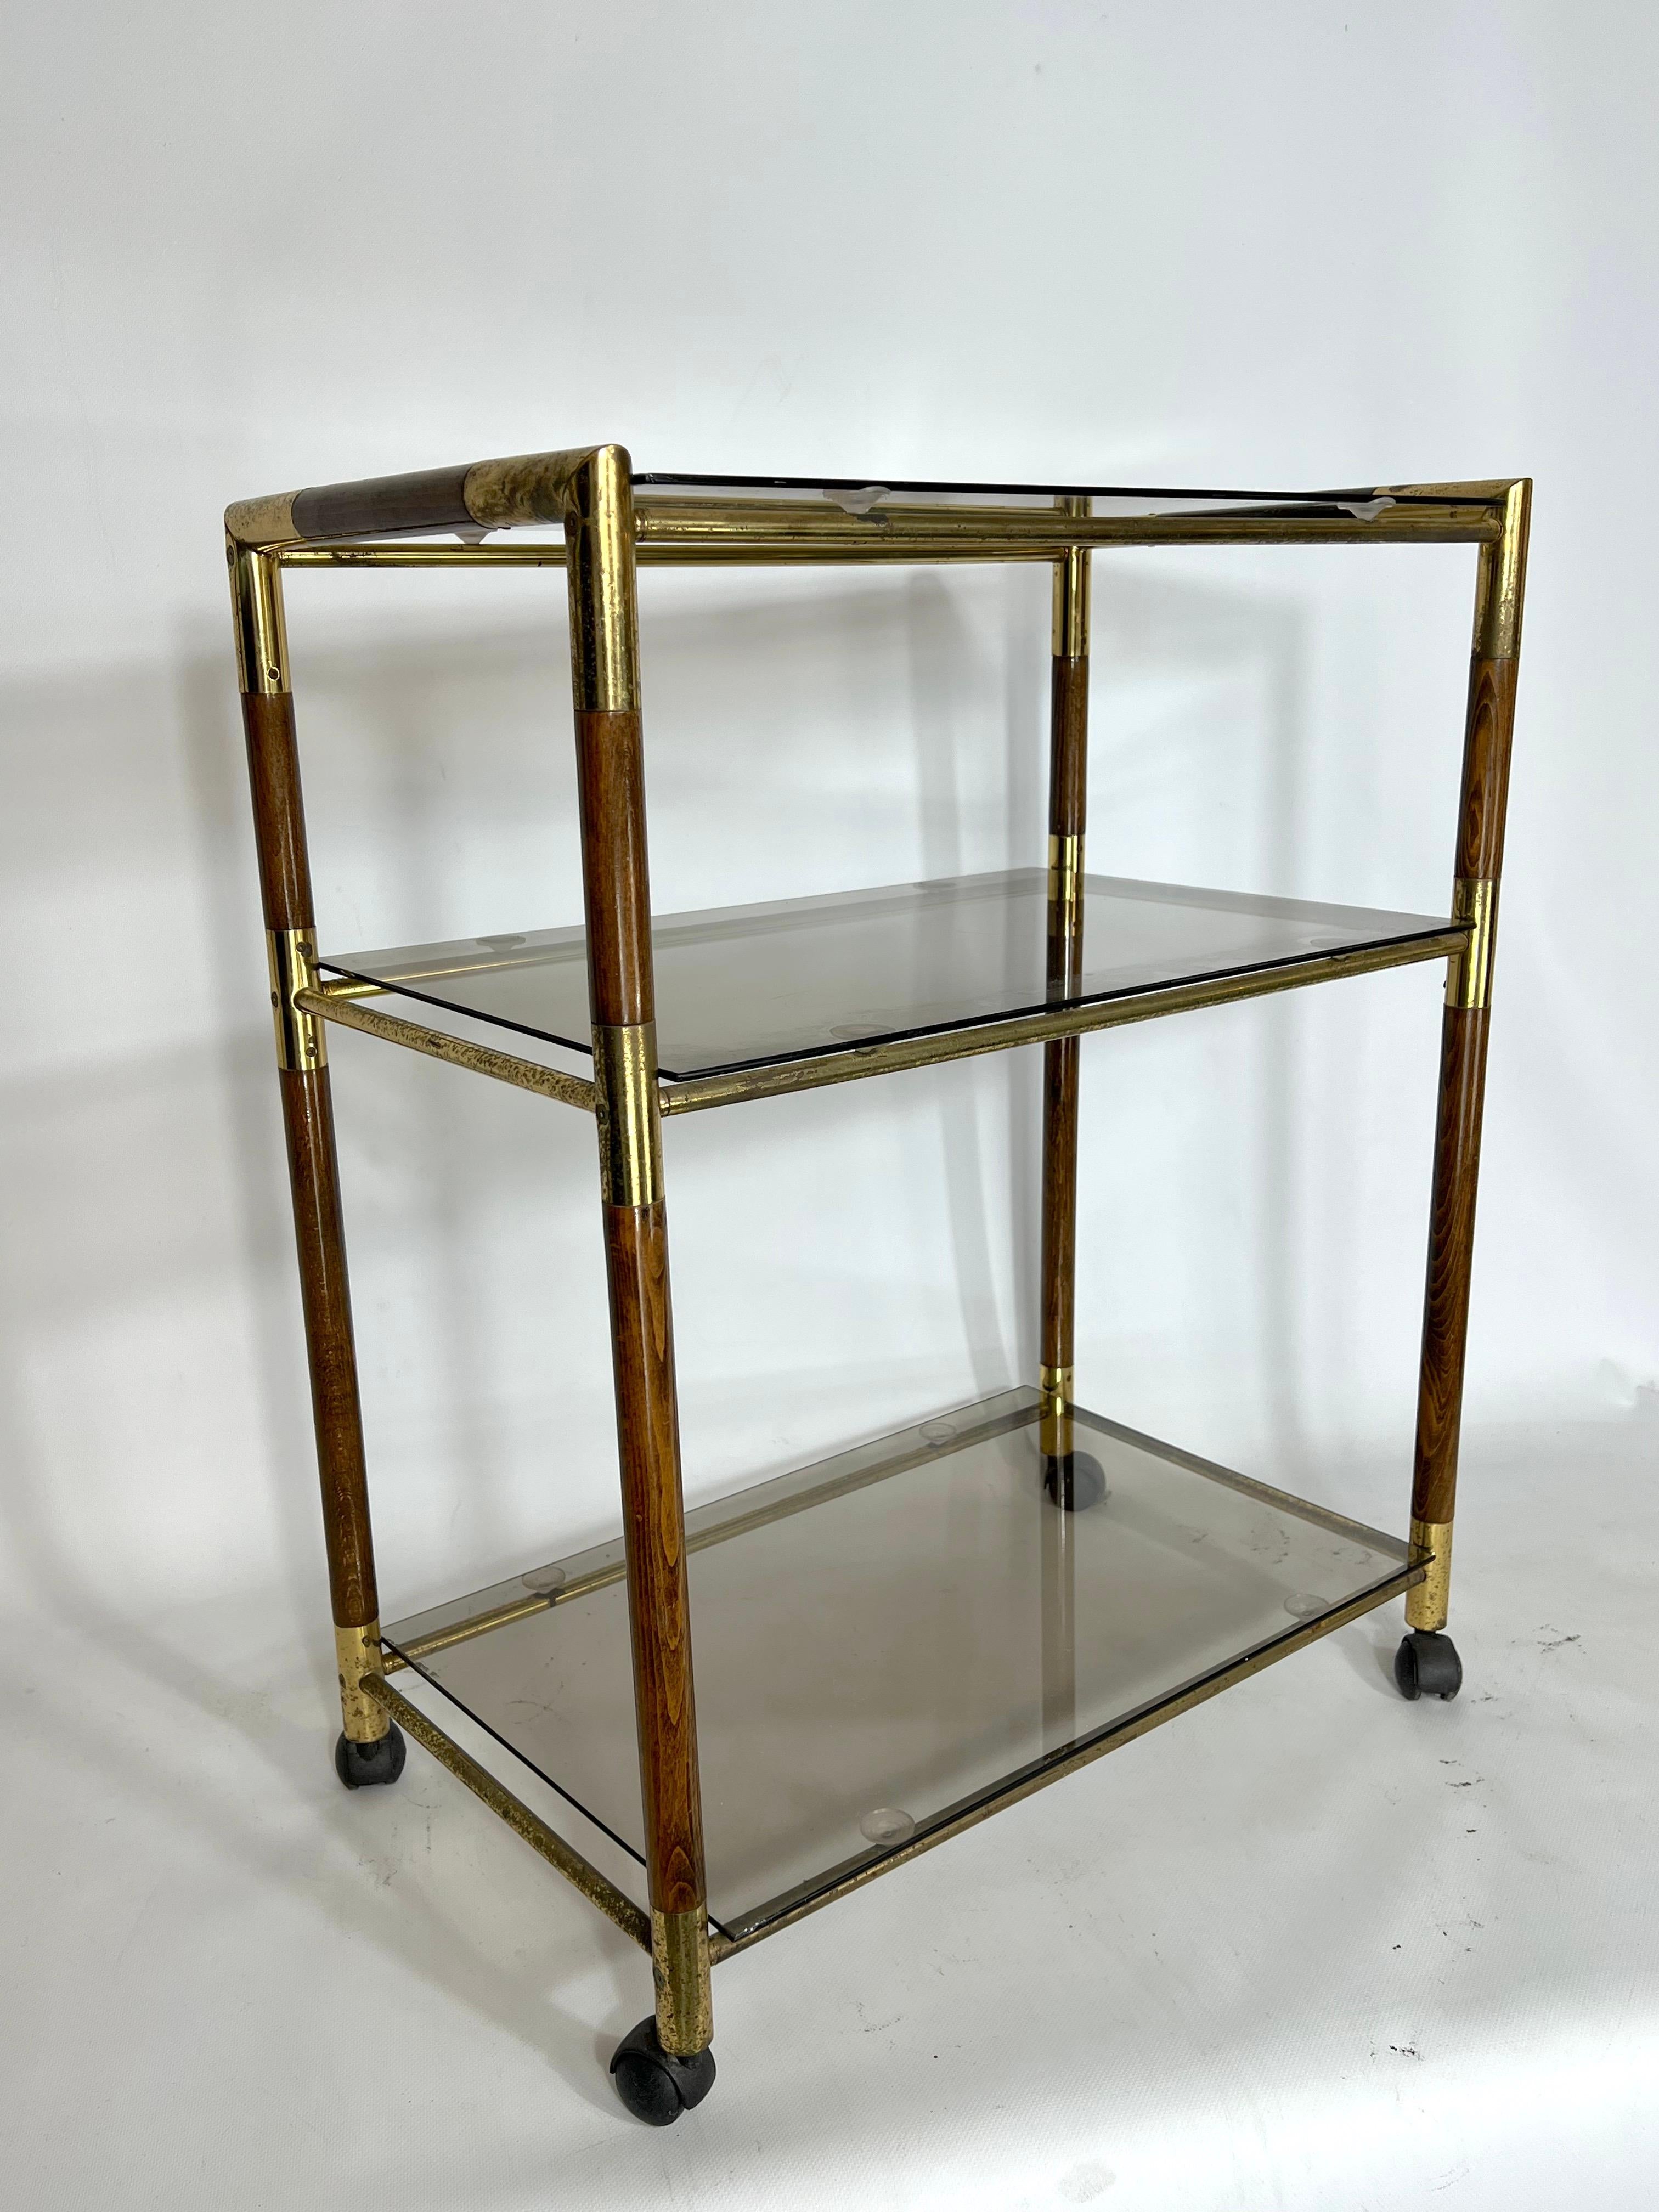 Vintage Three Shelves Brass and Wood Trolley or Bar Cart by Tommaso Barbi, 1970s For Sale 7